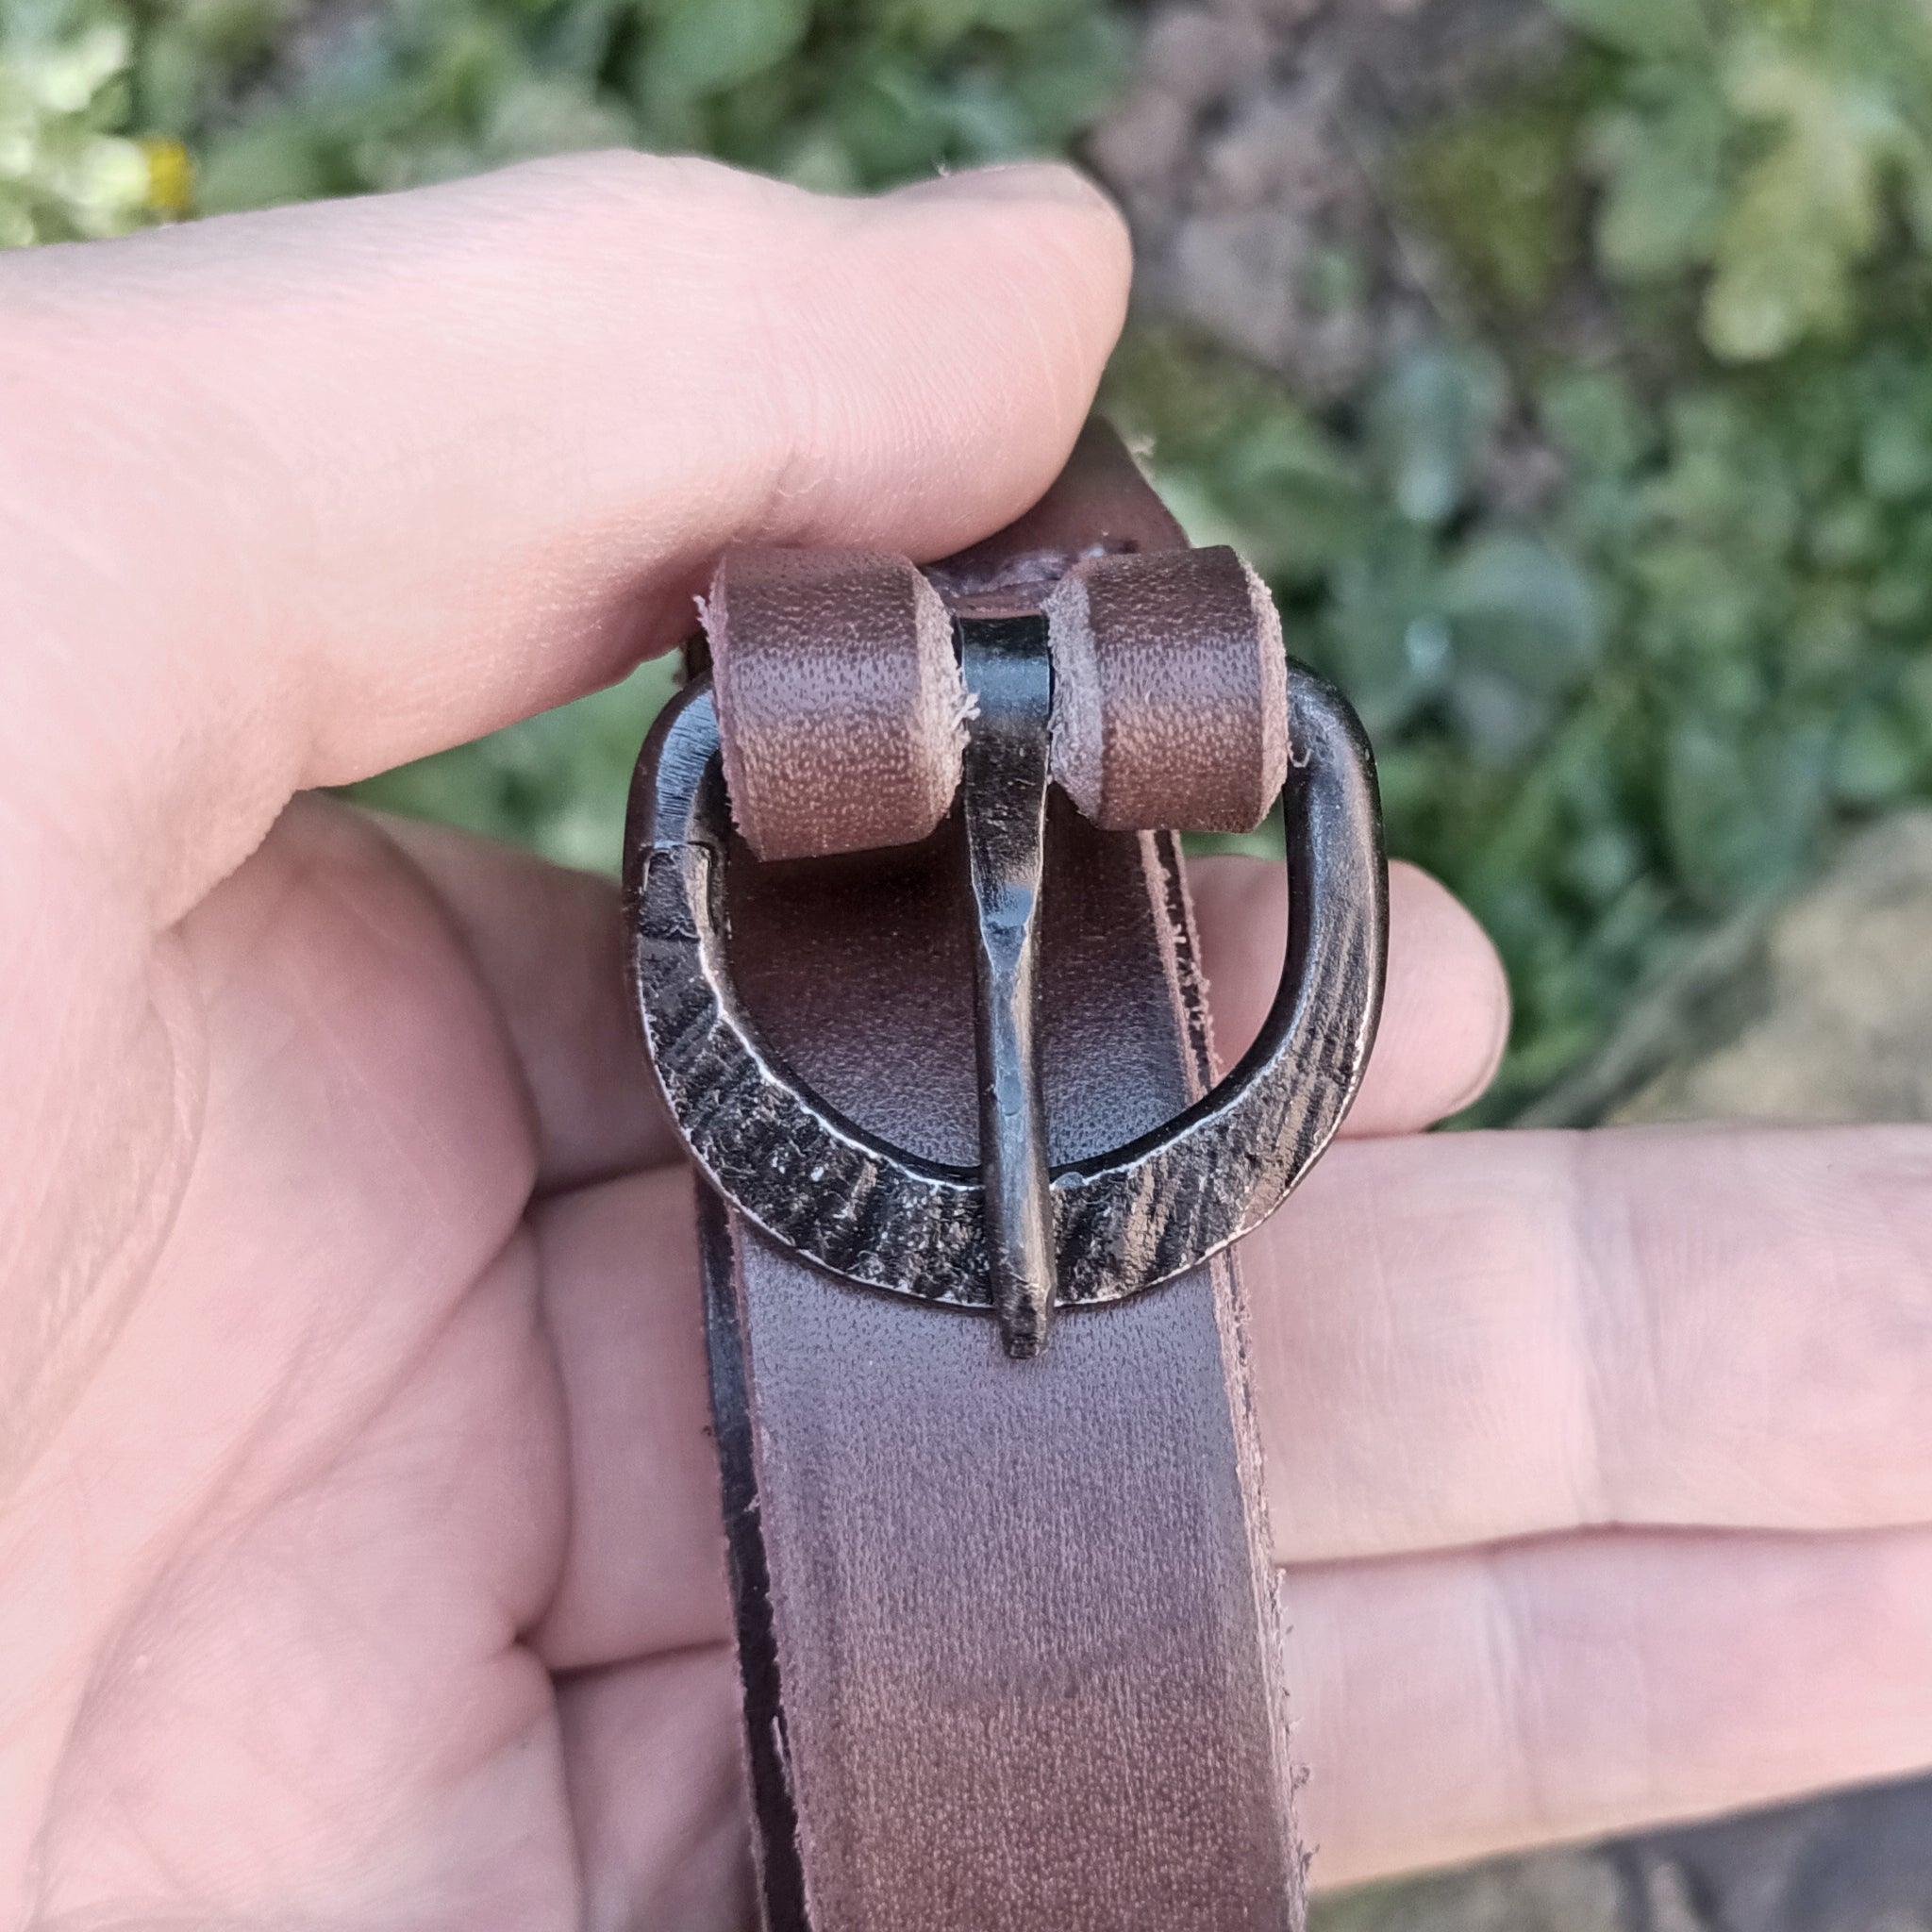 Hand-Forged Iron Viking / Medieval Buckle - 20mm (0.75 inch) on Brown Leather Belt in Hand